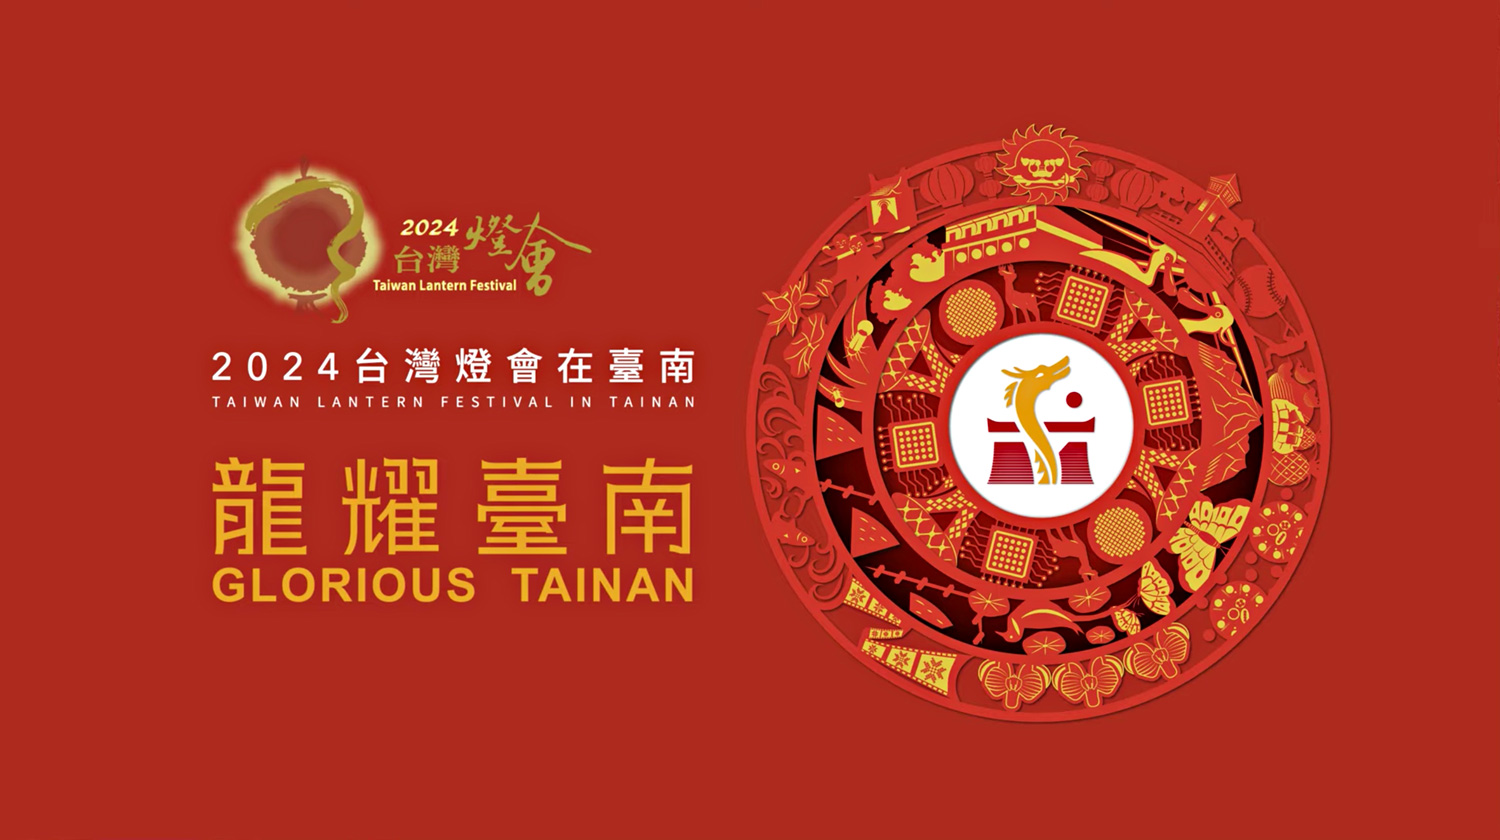 Tainan 400 Years of History-Join the 2024 Taiwan Lantern Festival